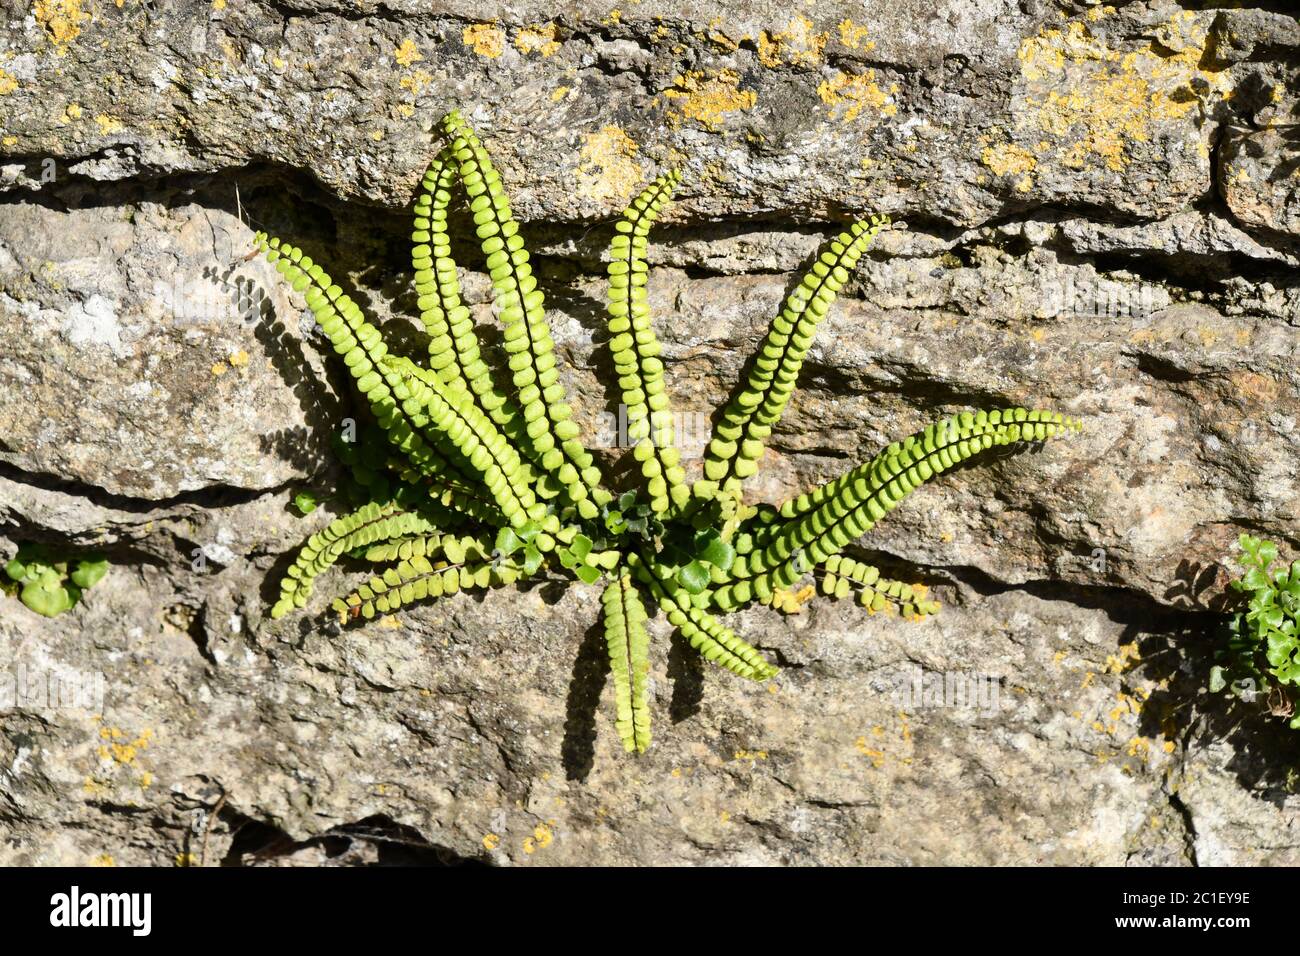 Maidenhair Spleenwort 'Asplenium trichomanes' The fern growing in a crevice on a lichen covered limestone wall in a town in Somerset. Stock Photo